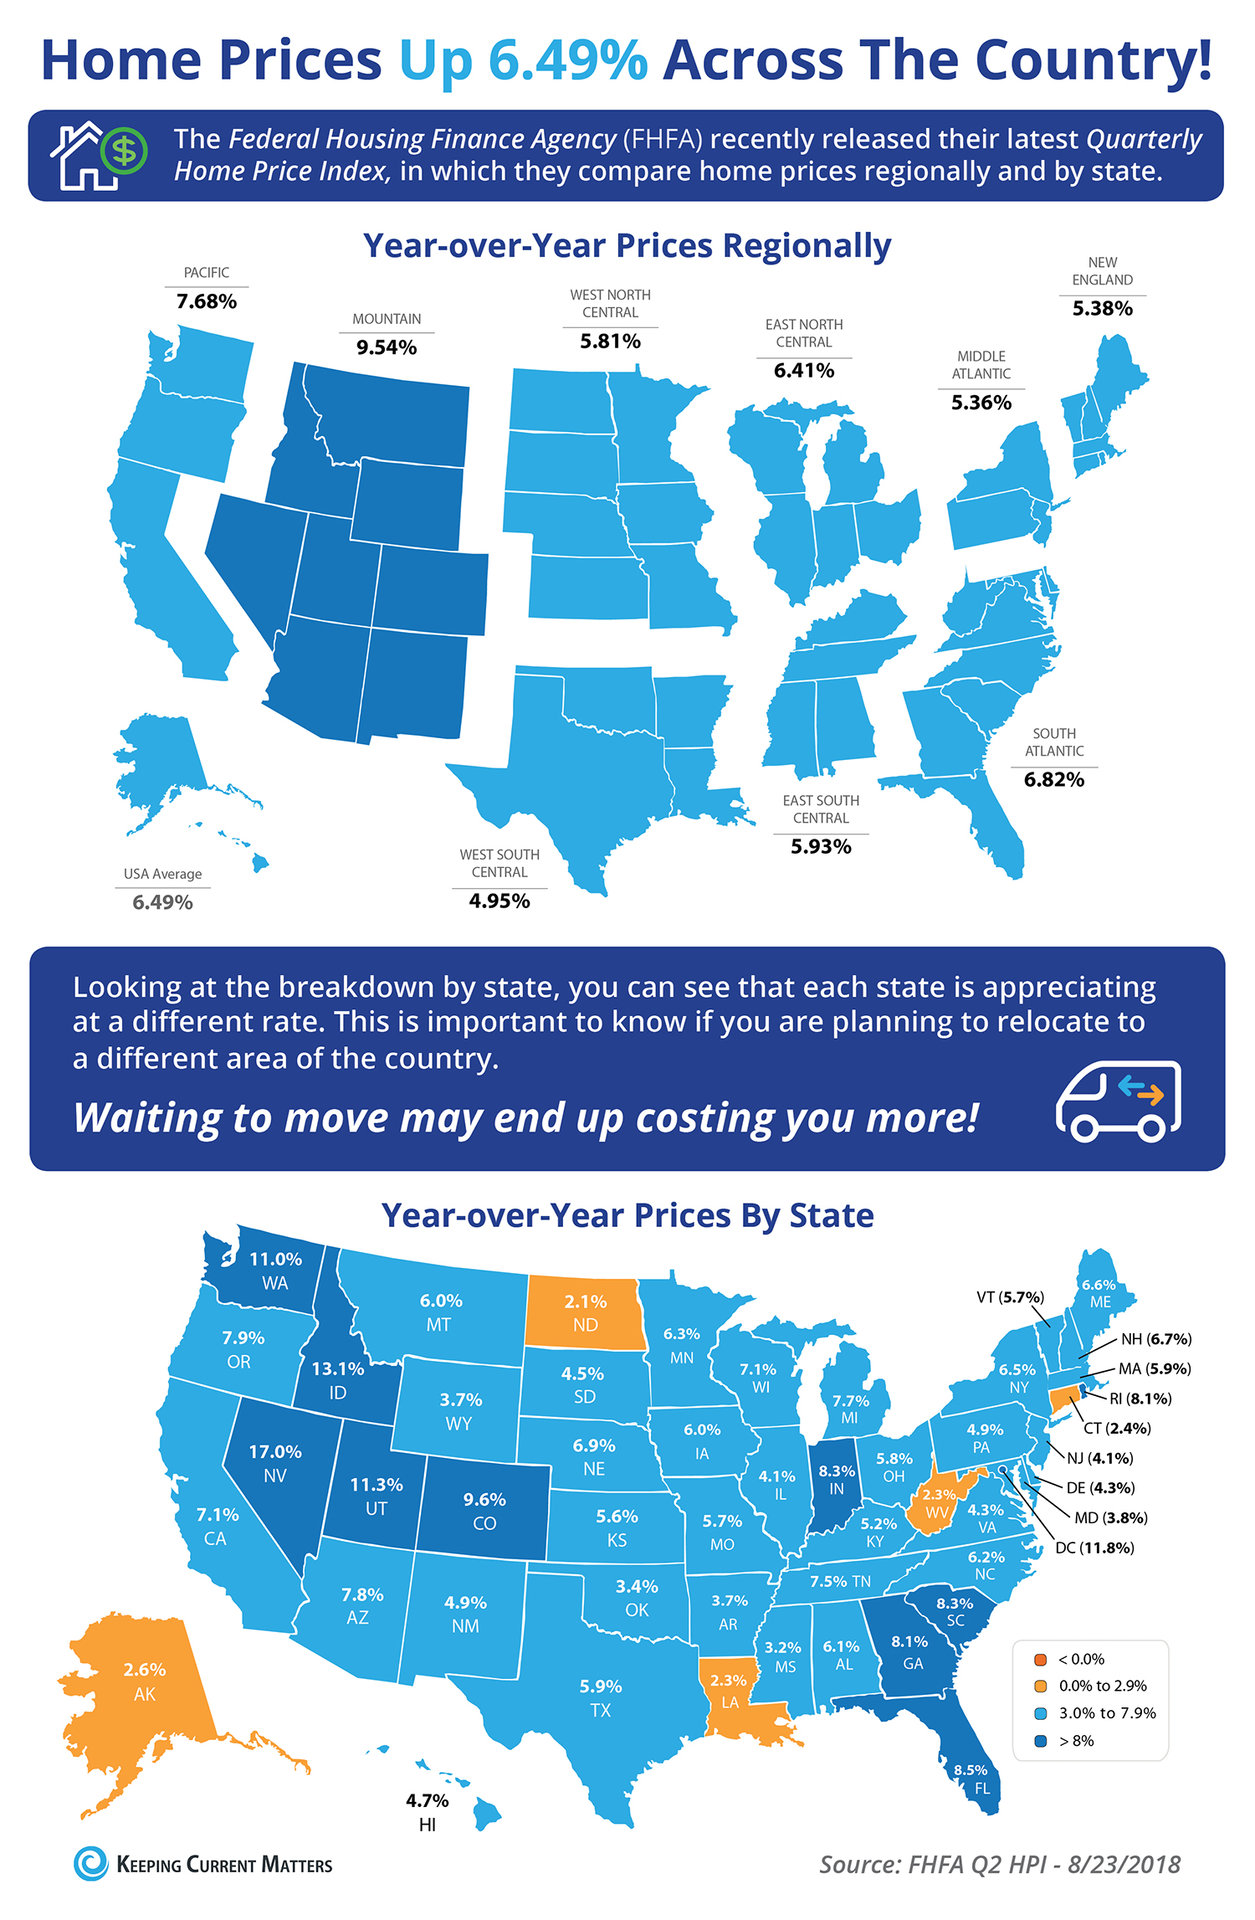 Home Prices Up 6.49% Across the Country! [INFOGRAPHIC] | Keeping Current Matters